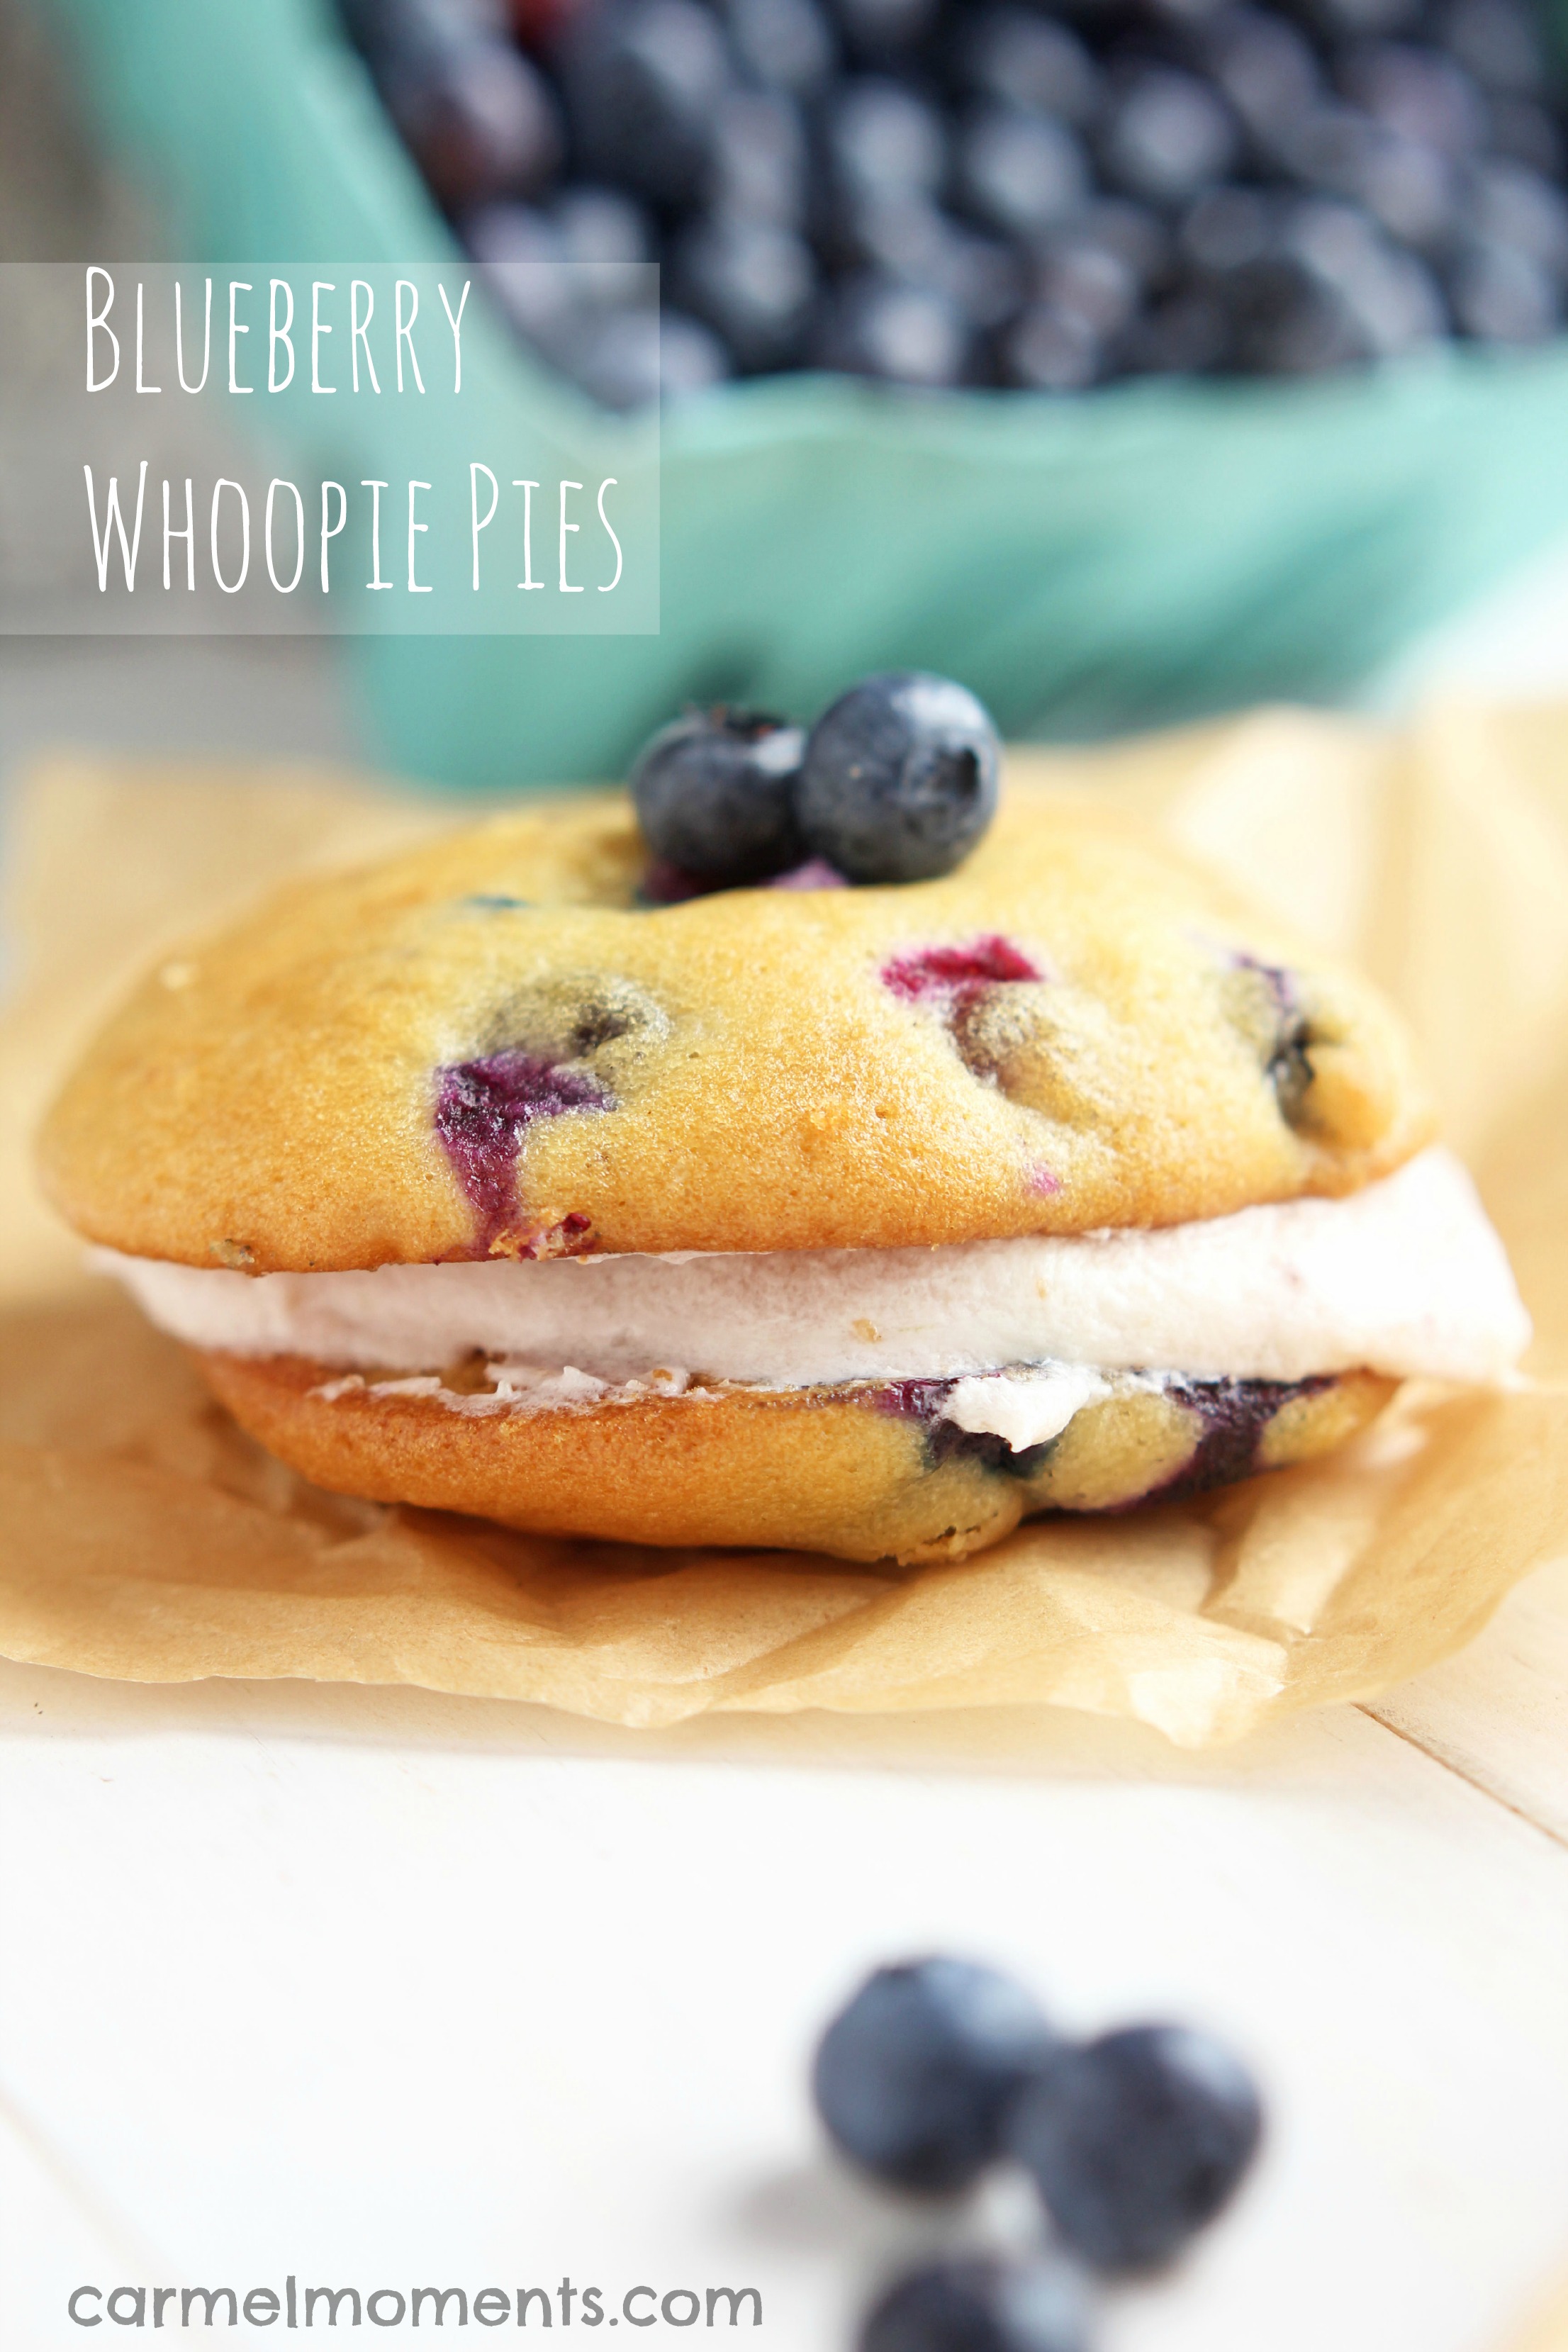 https://gatherforbread.com/wp-content/uploads/2013/07/Blueberry-Whoopie-Pies-Carmel-Moments.jpg